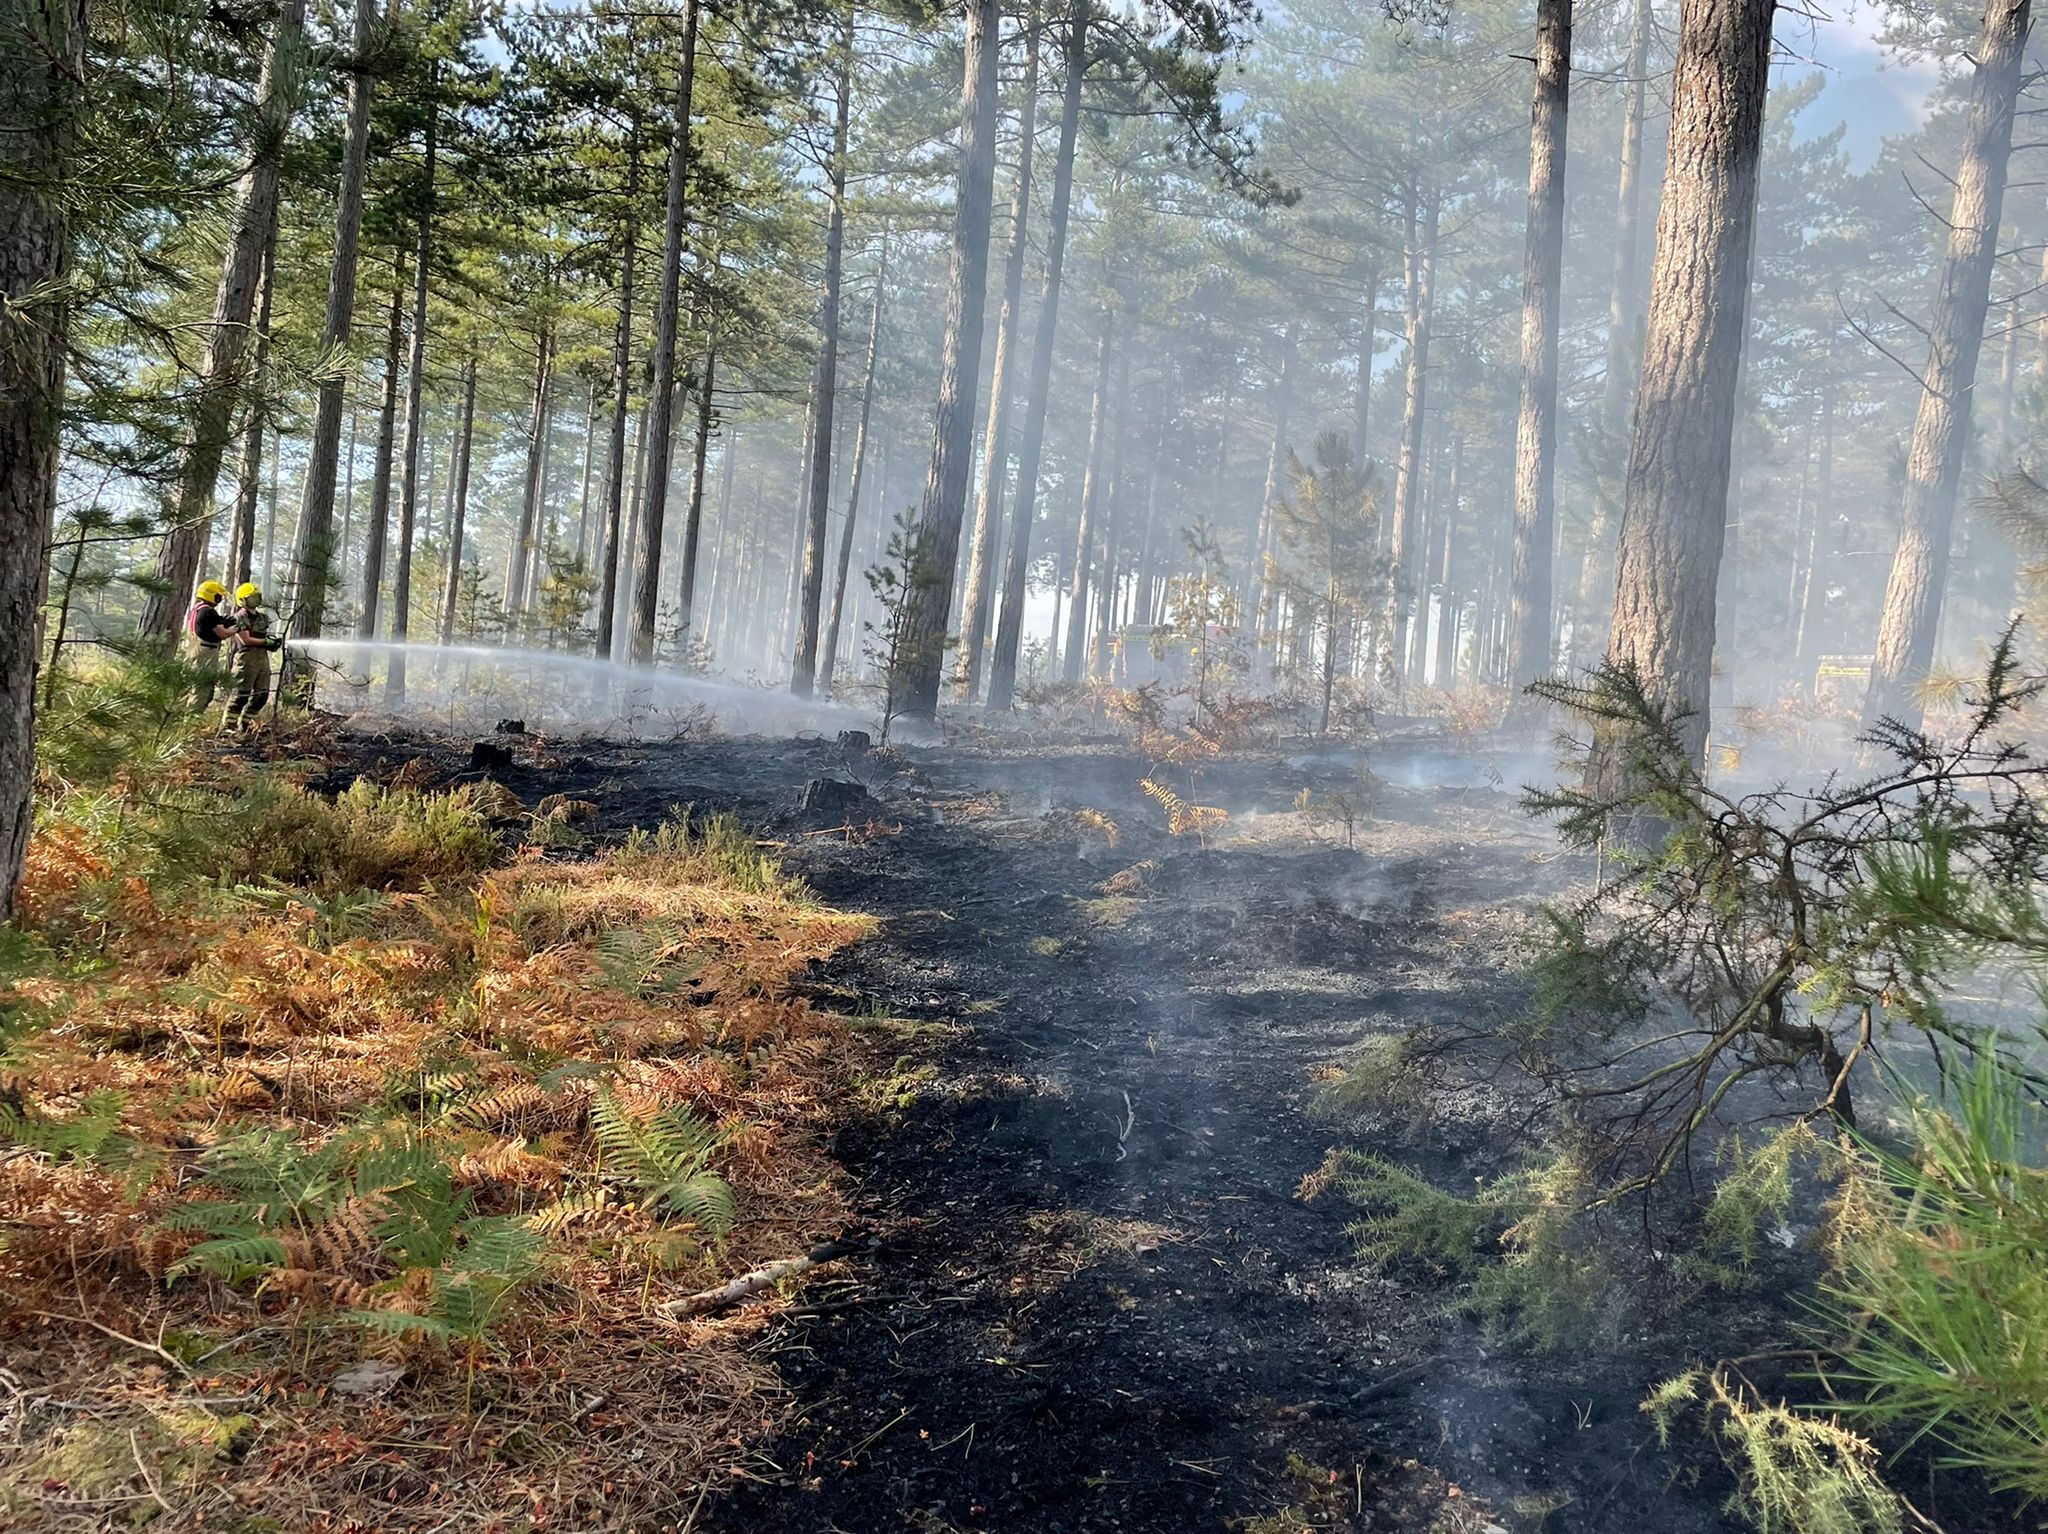 Heath affected by fire within Wareham forest